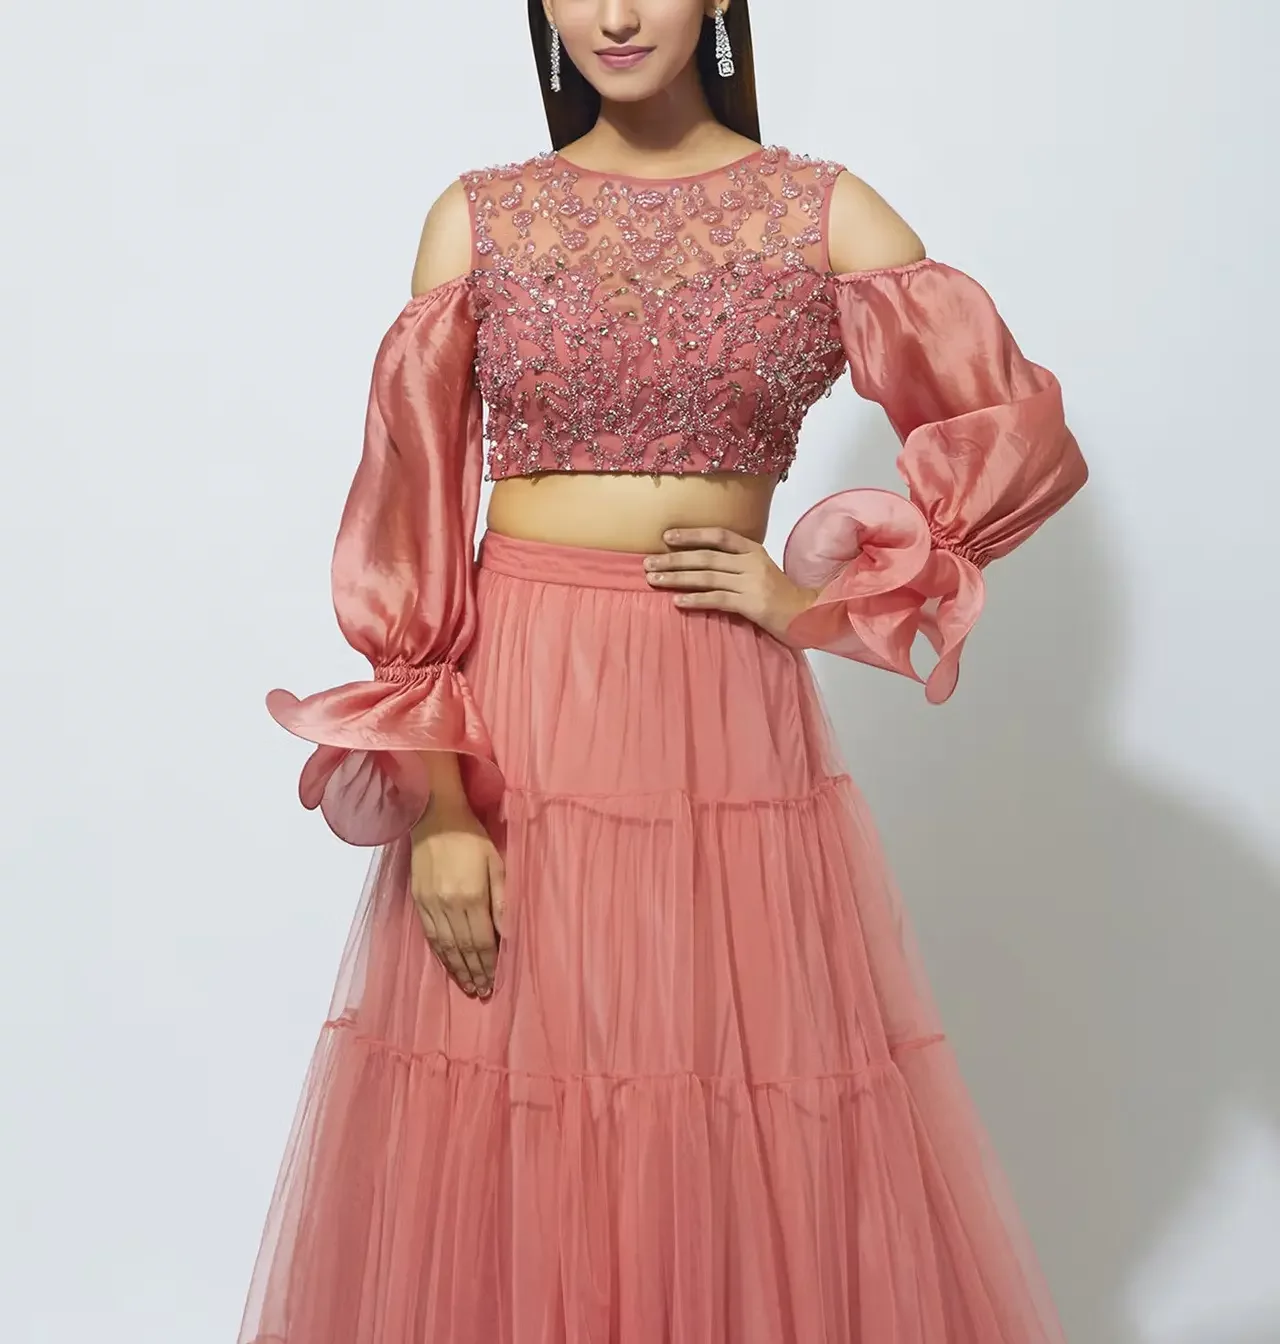 30+ Latest Blouse Designs For Lehenga To Nail Your Big Day Look!! - SetMyWed